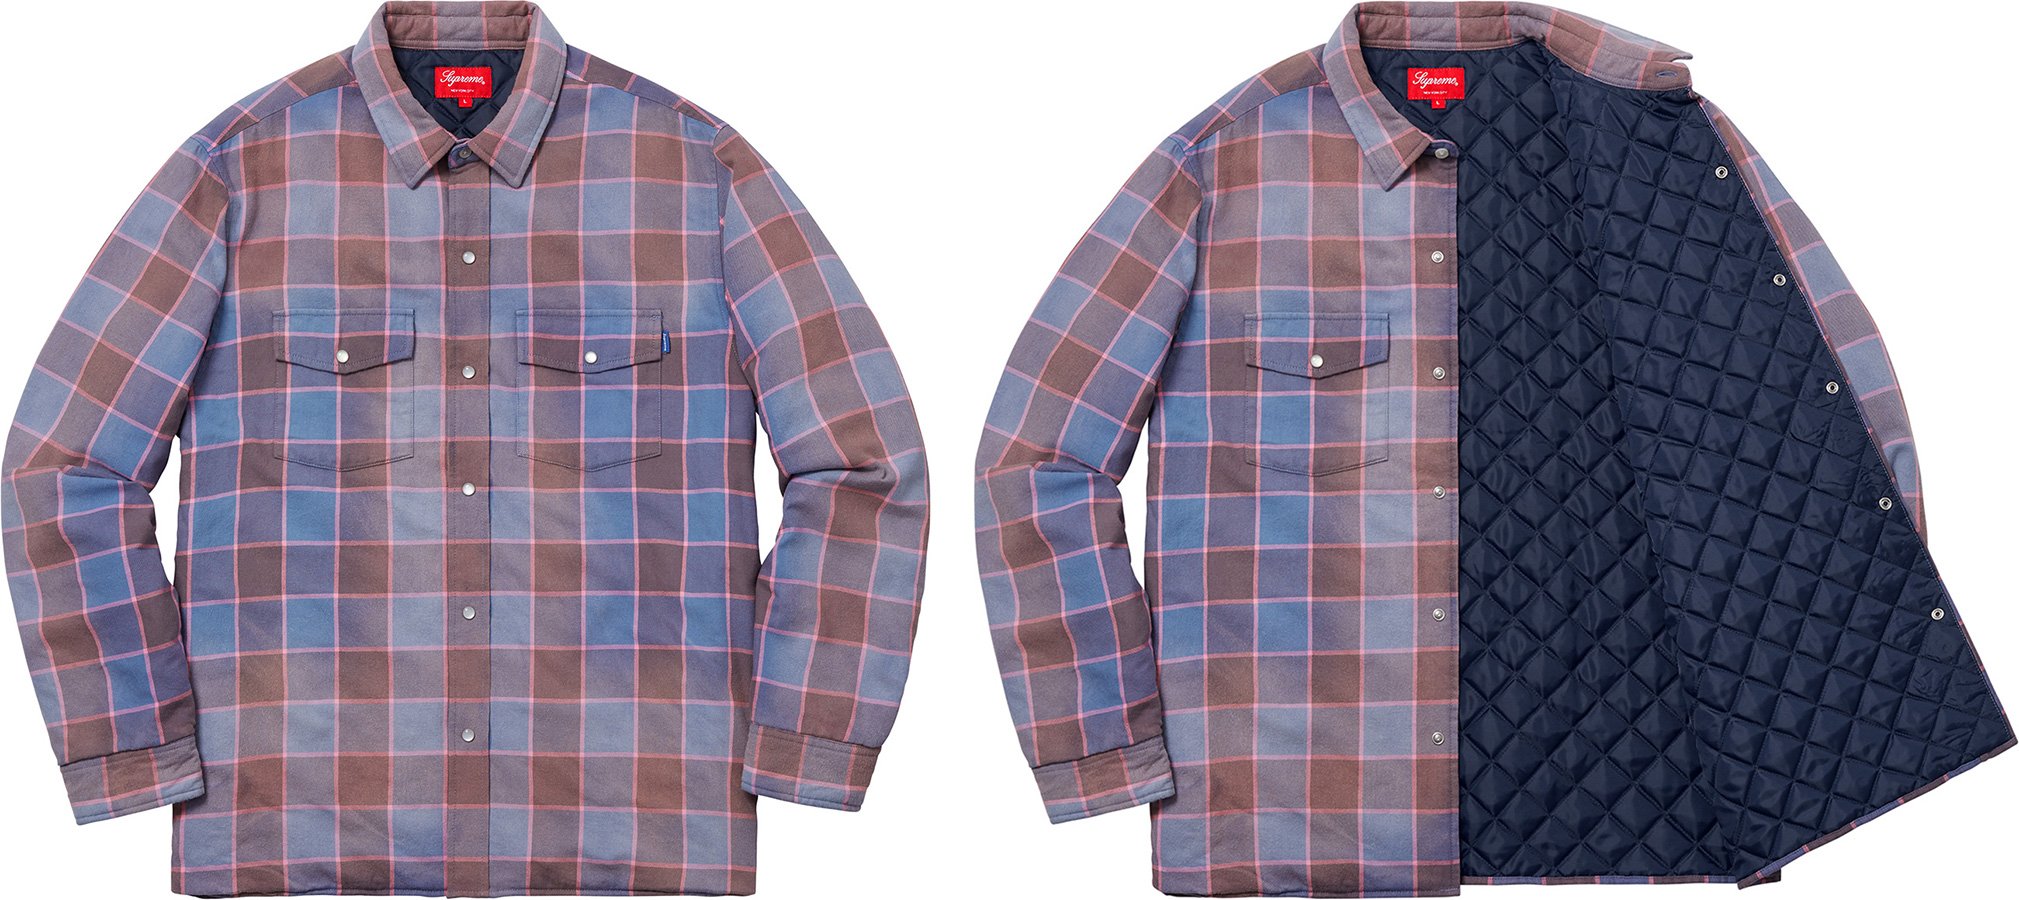 supreme Quilted Faded Plaid Shirt